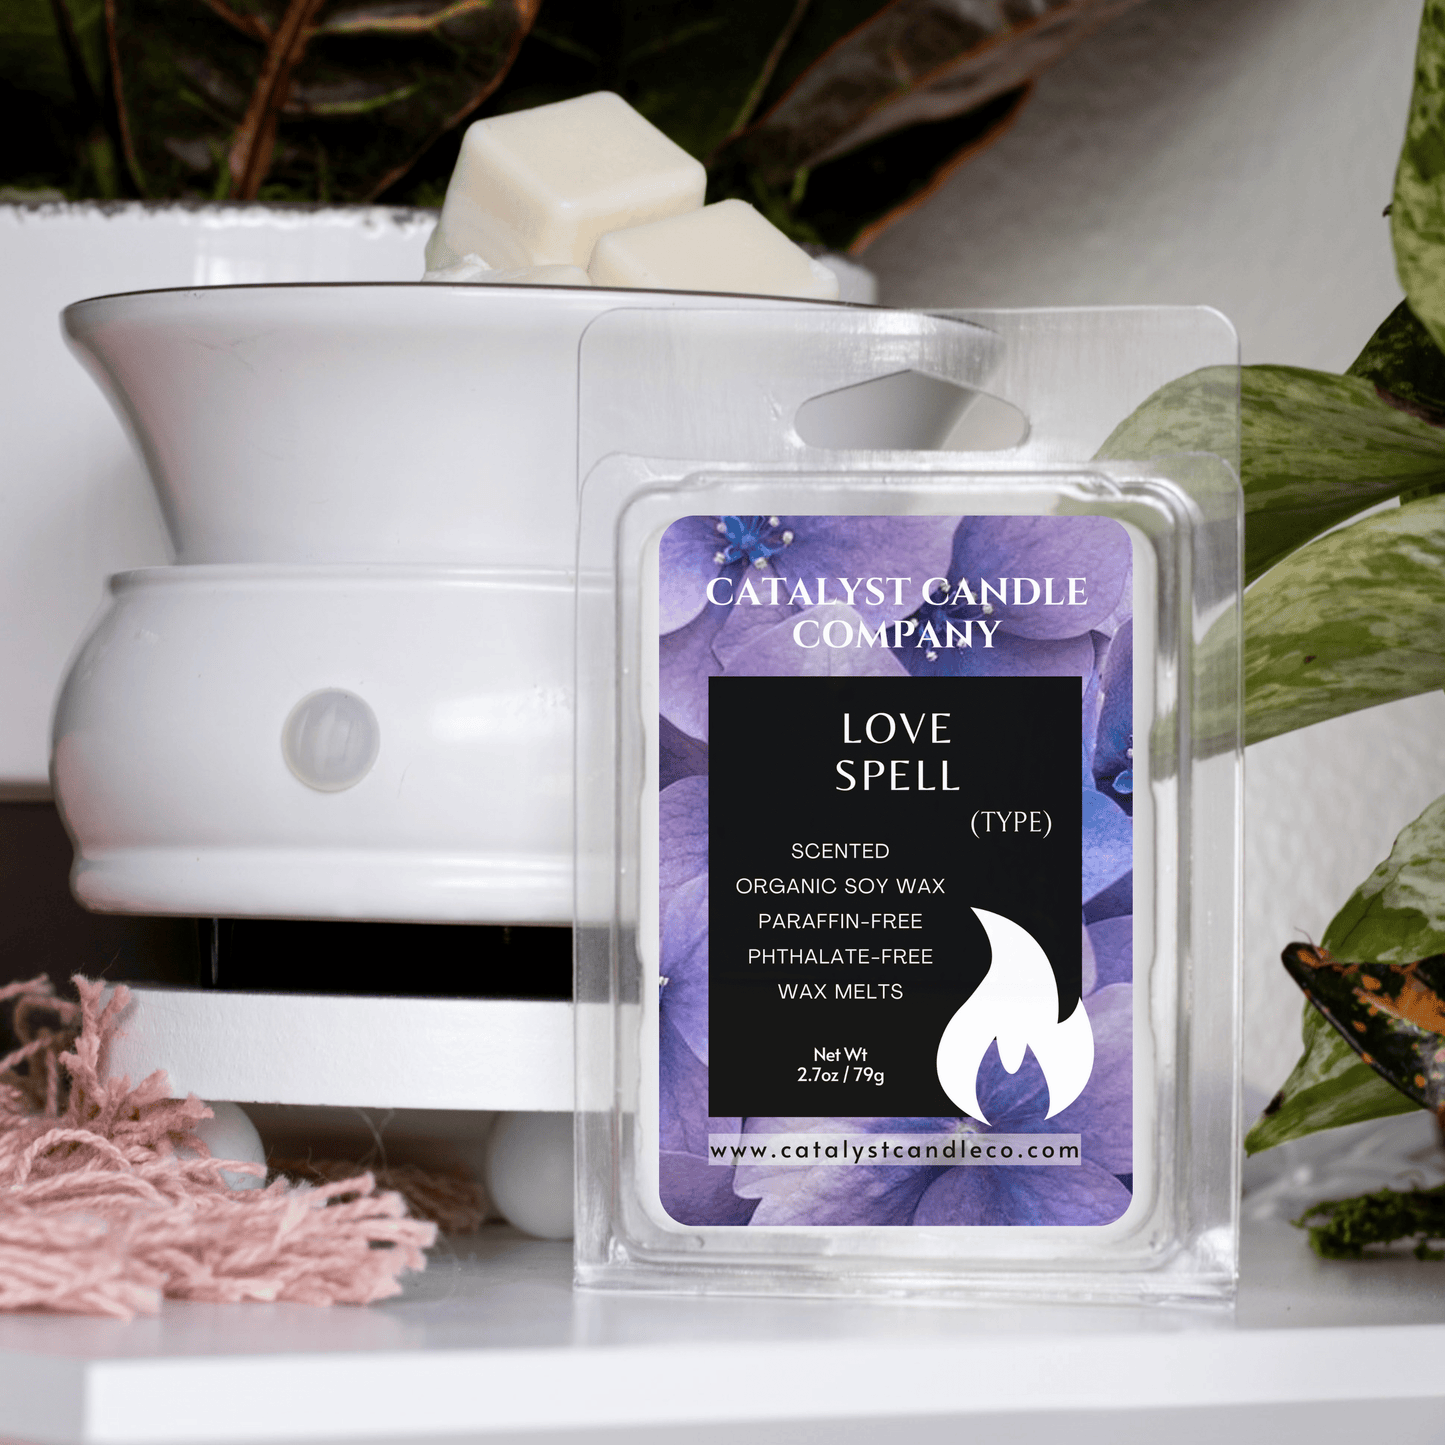 Floral, perfume aroma. Love Spell (Type) scented soy wax melts. Catalyst Candle Company, LLC